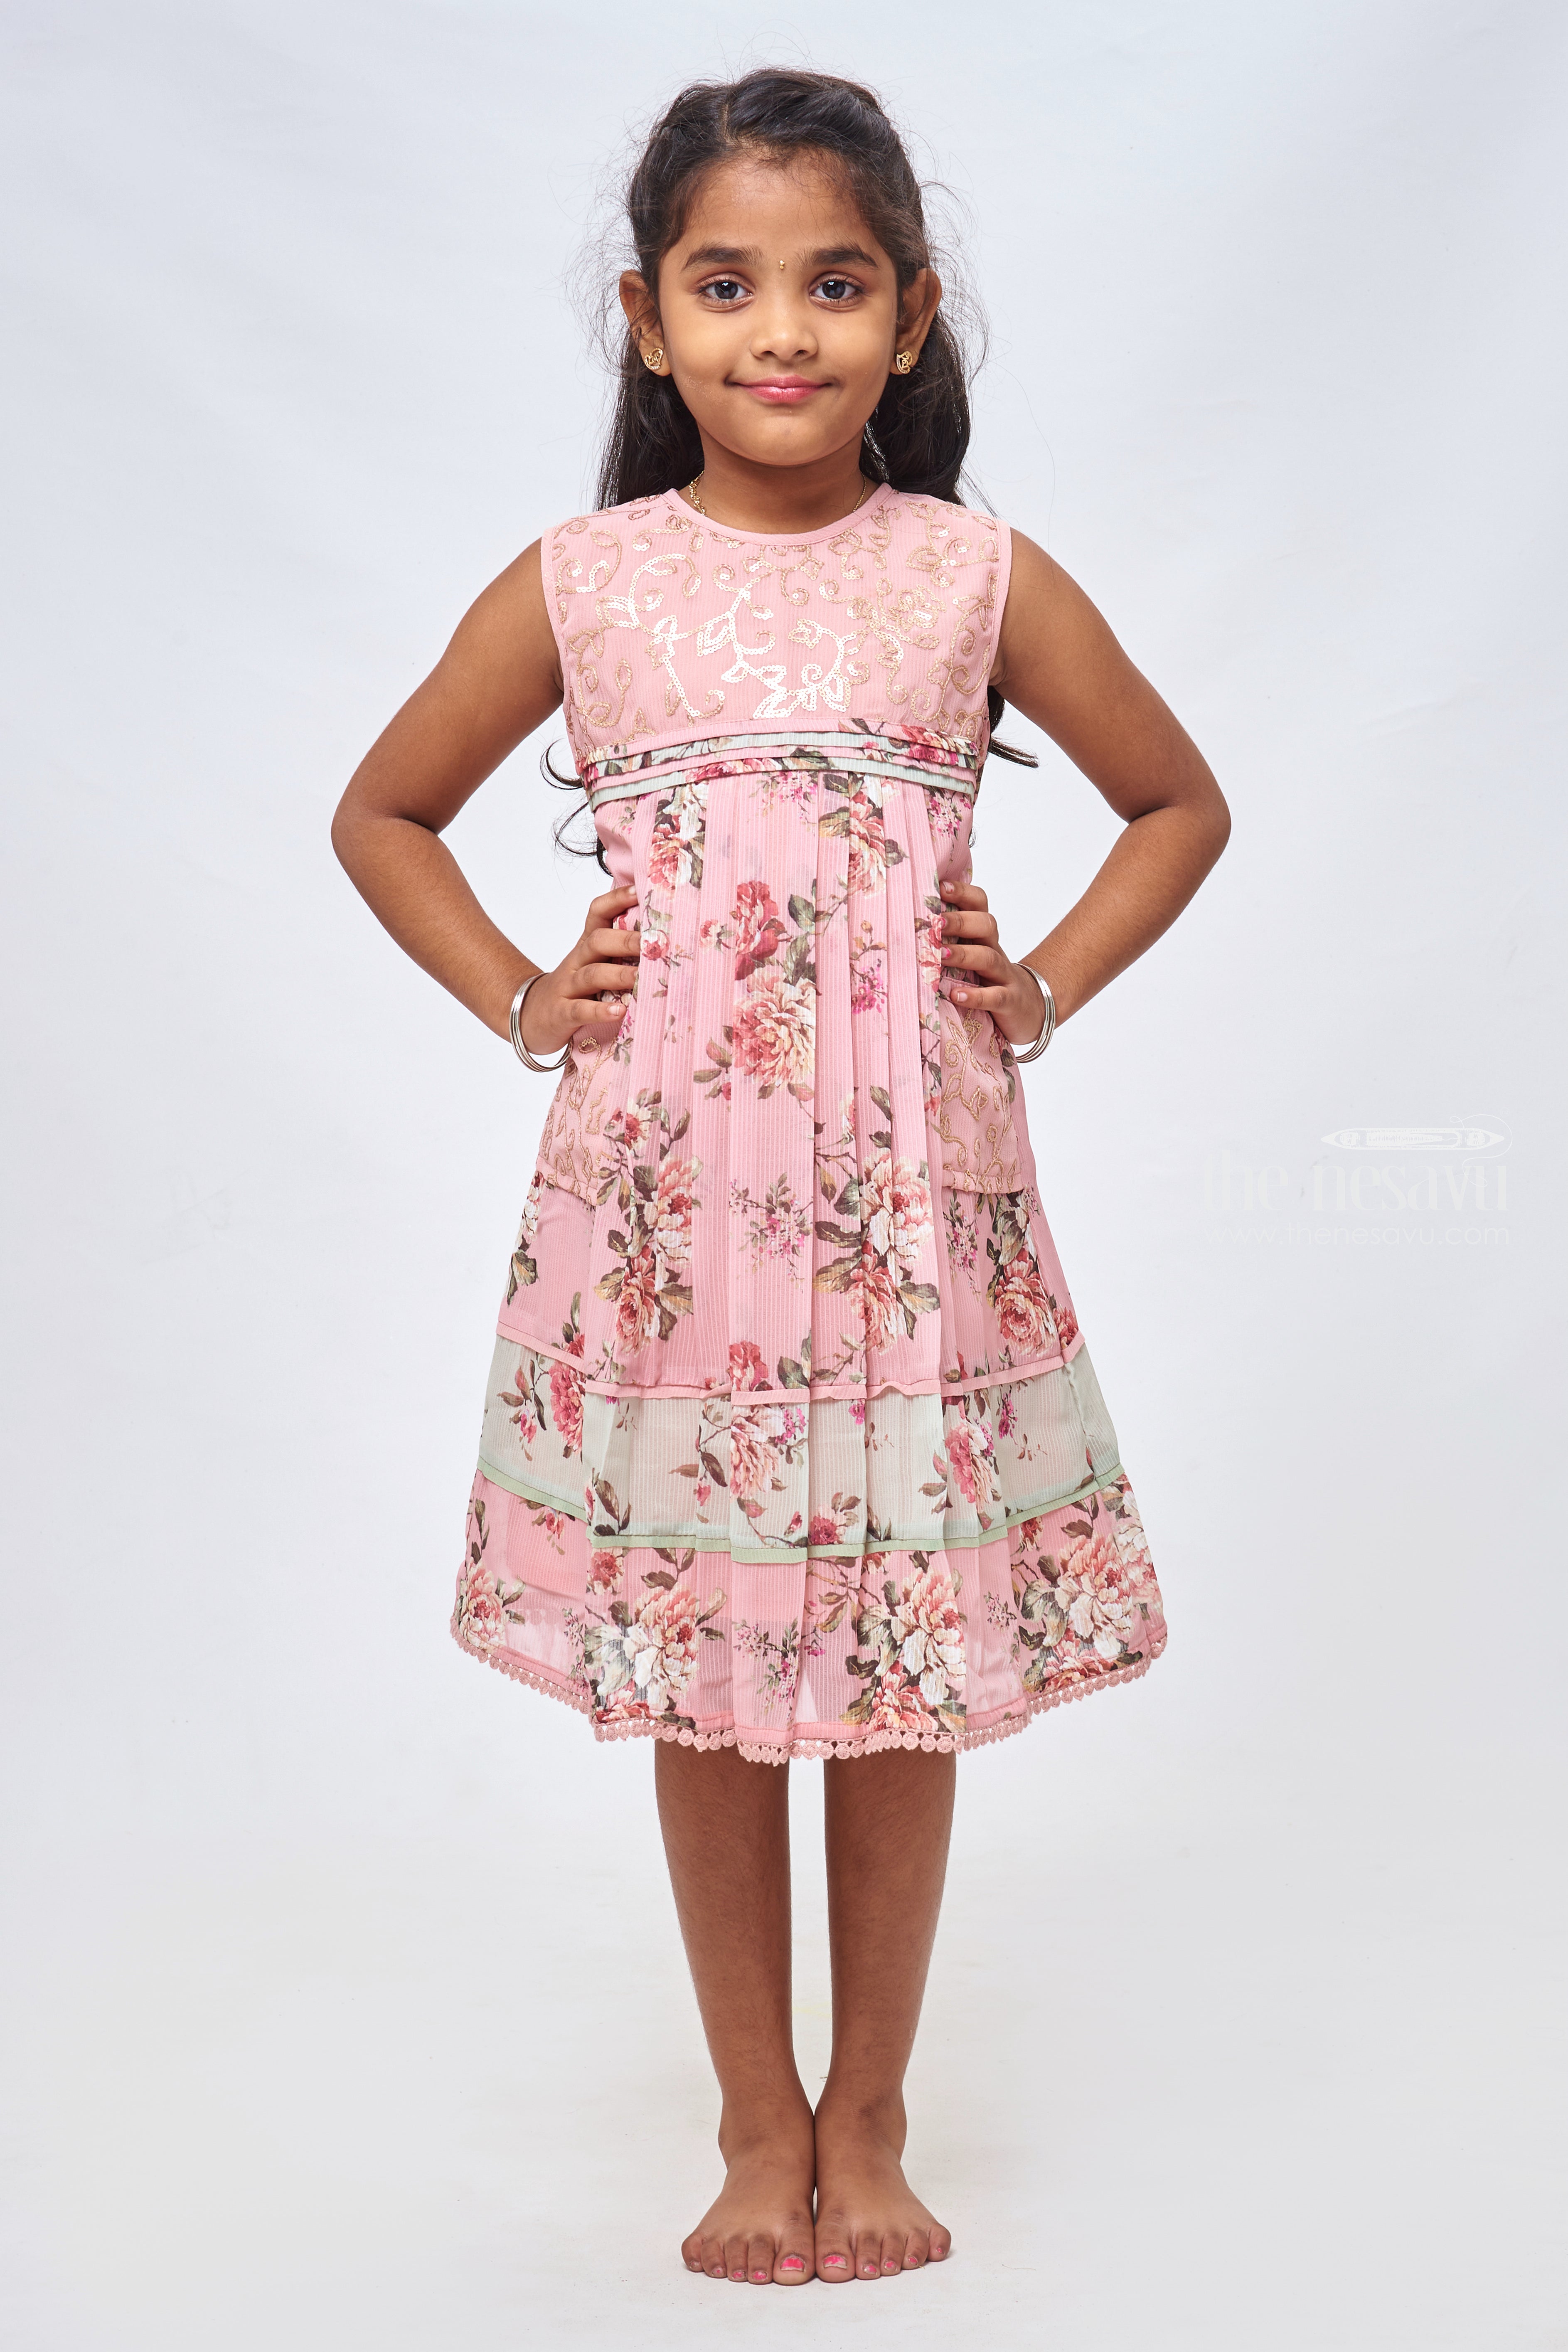 MisfitIndia Girl Cotton Frock | Dress | Cute Collection Summer wear, Dress  Pretty Look New & Latest Fashion Dress for Kids/Girls (Colour Pink)� :  Amazon.in: Fashion